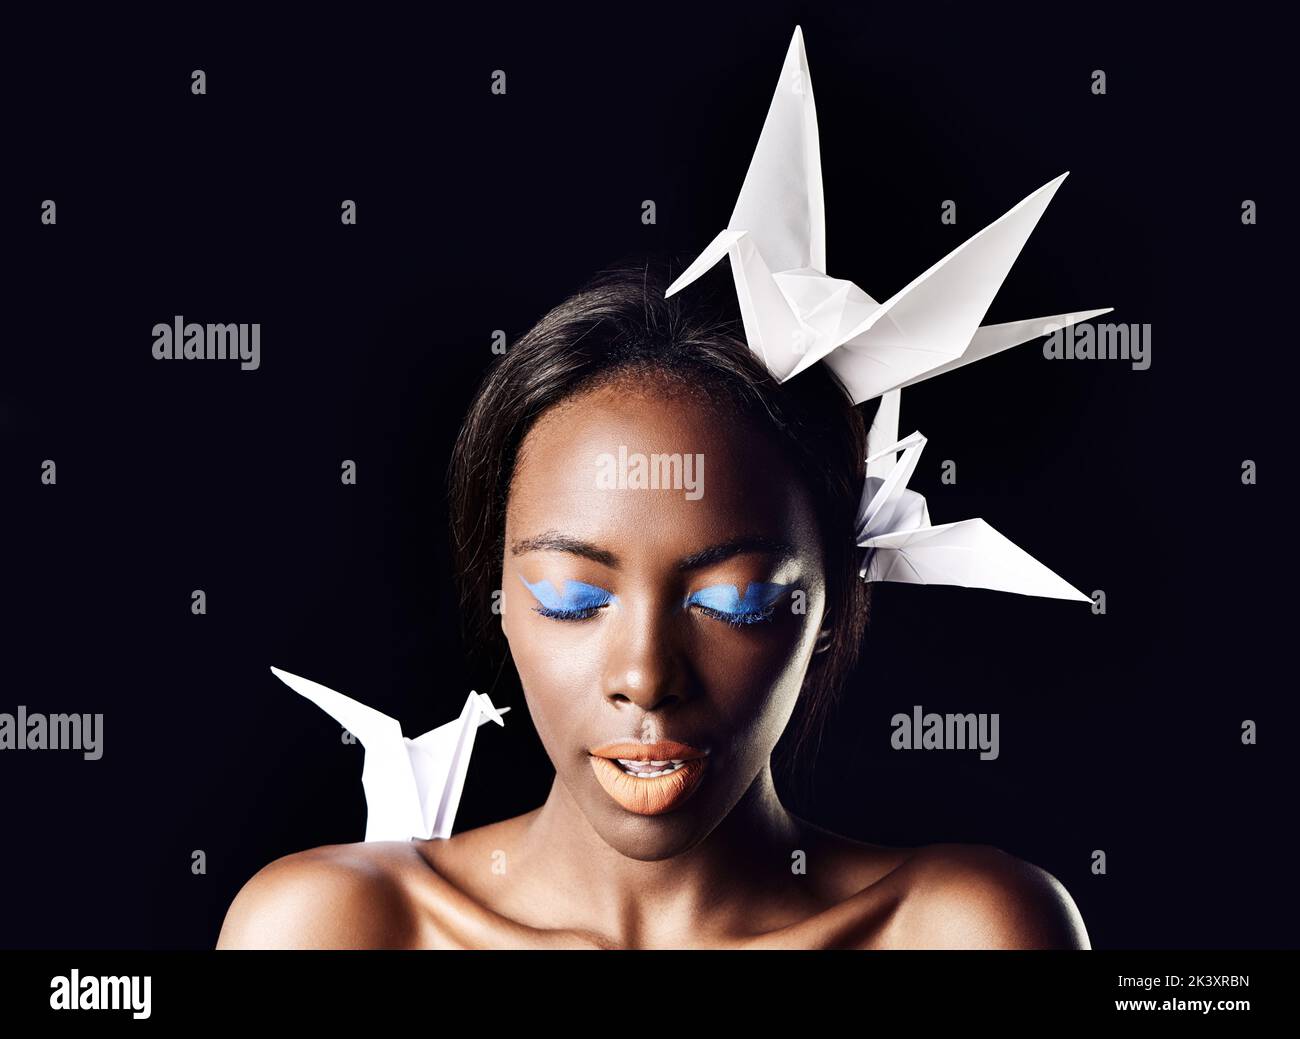 Shes a true queen. a beautiful ethnic woman posing with origami birds on her head and shoulders. Stock Photo